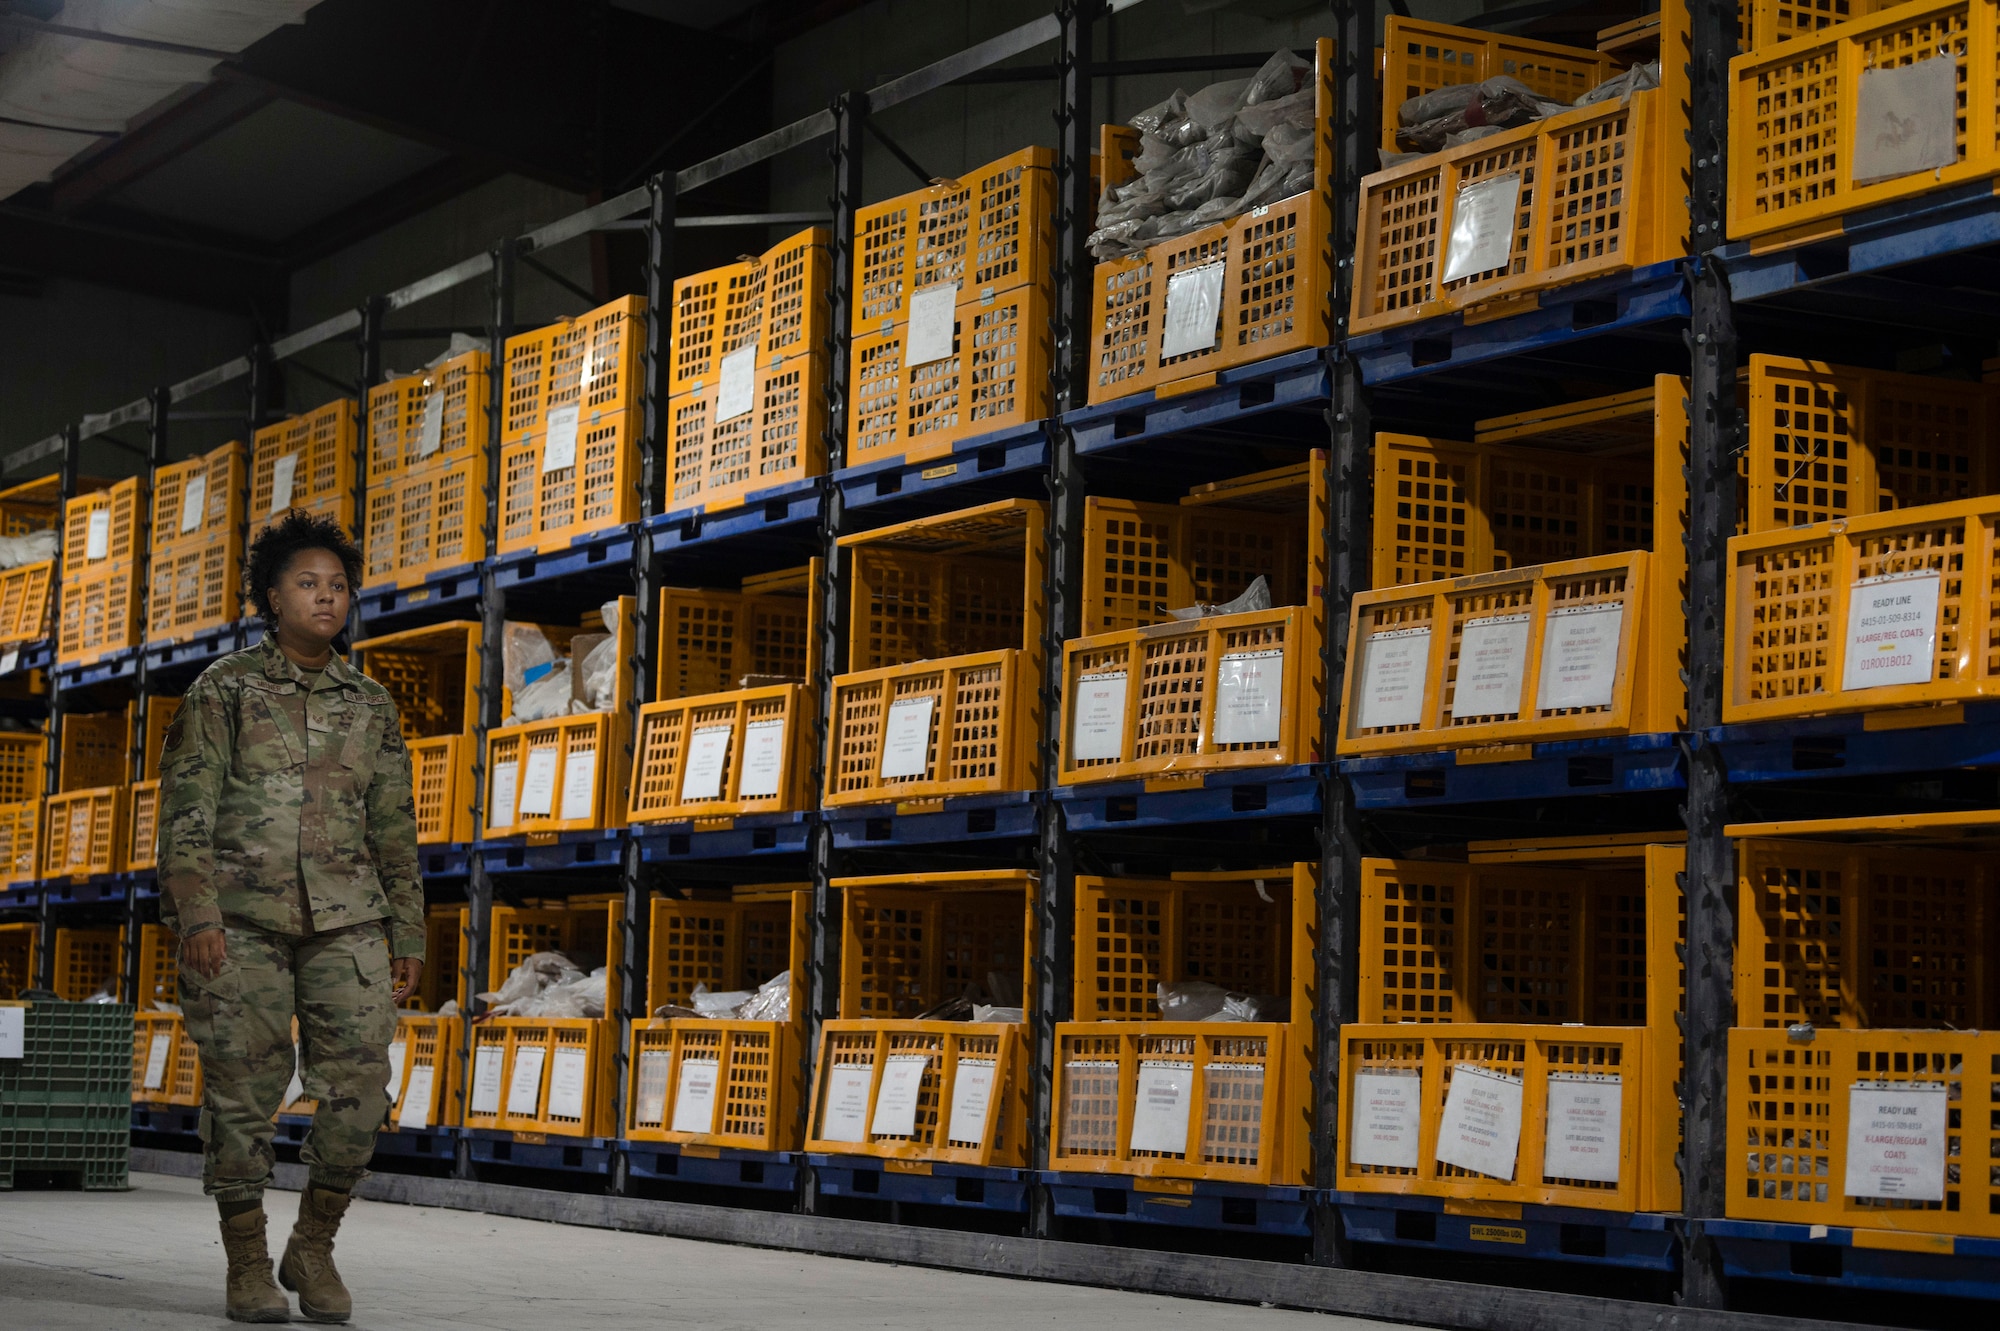 U.S. Air Force Staff Sgt. Iyana Milner, 386th Expeditionary Logistics Readiness Squadron Expeditionary Theater Distribution Center supervisor, inventories protective gear at the ETDC on Ali Al Salem Air Base, Kuwait, July 13, 2022. The EDTC team is responsible for the maintenance and readiness of approximately 200,000 pieces of equipment. (U.S. Air Force photo by Staff Sgt. Dalton Williams)